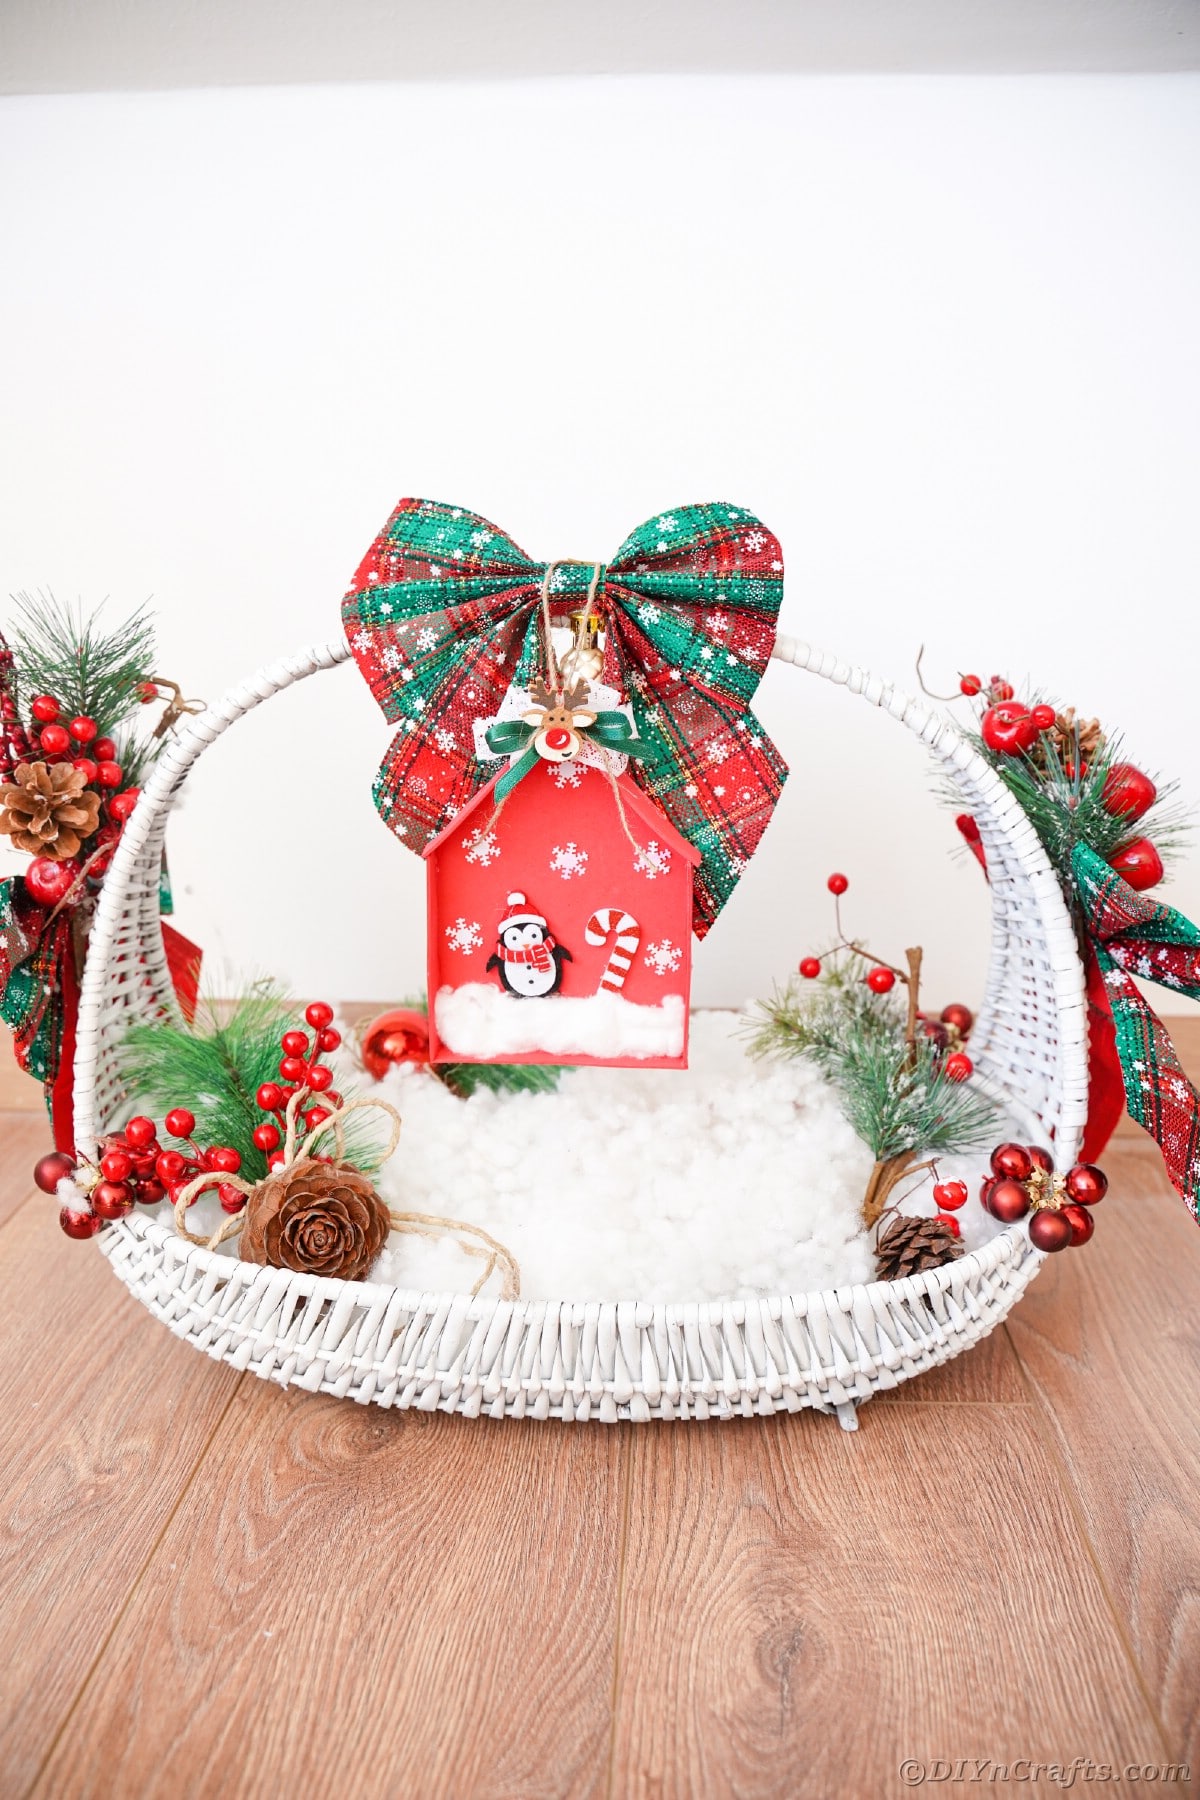 white basket on table filled with fake snow and a foam house ornament hanging beneath green bow